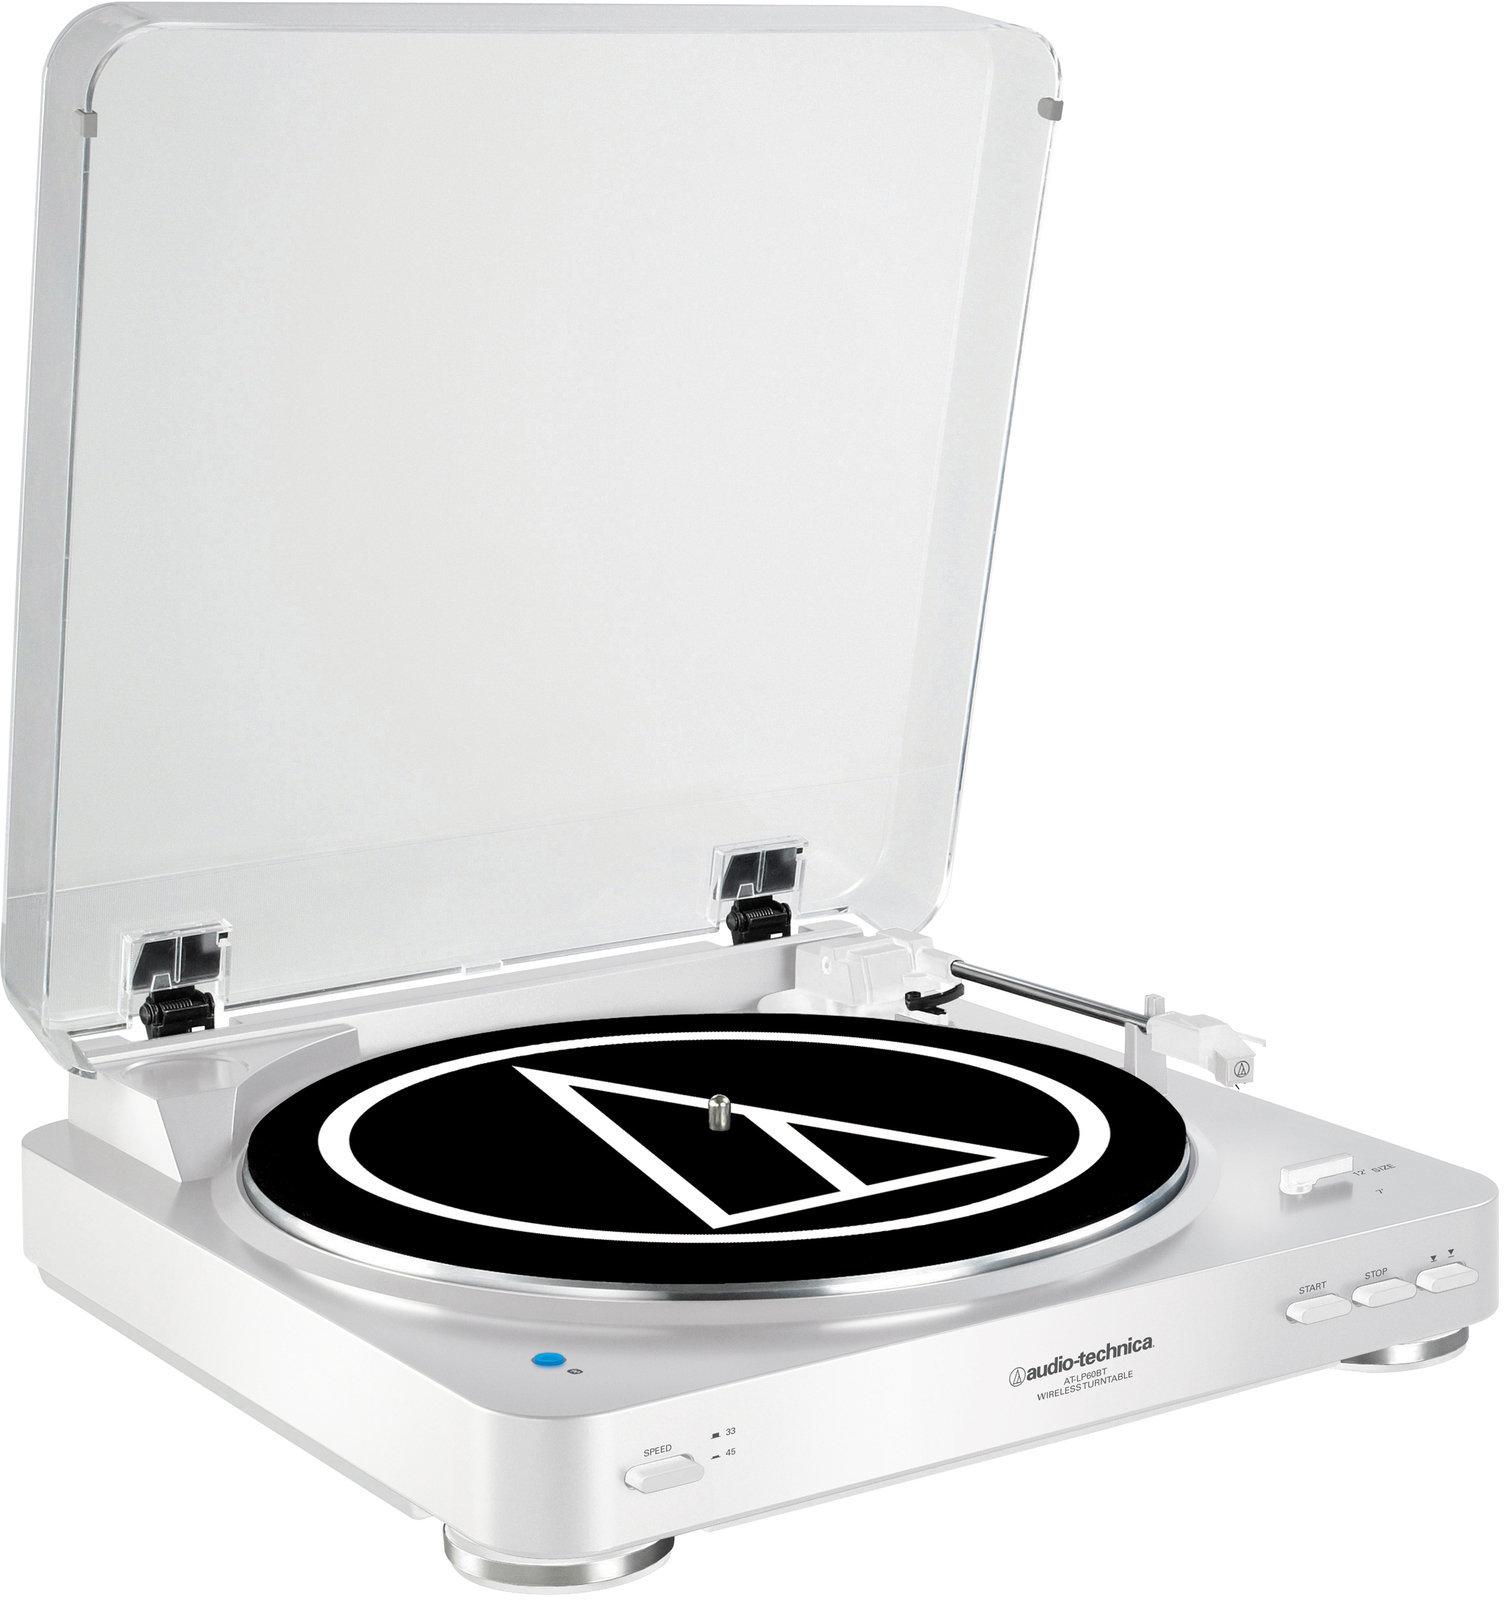 Turntable Audio-Technica AT-LP60BT-WH